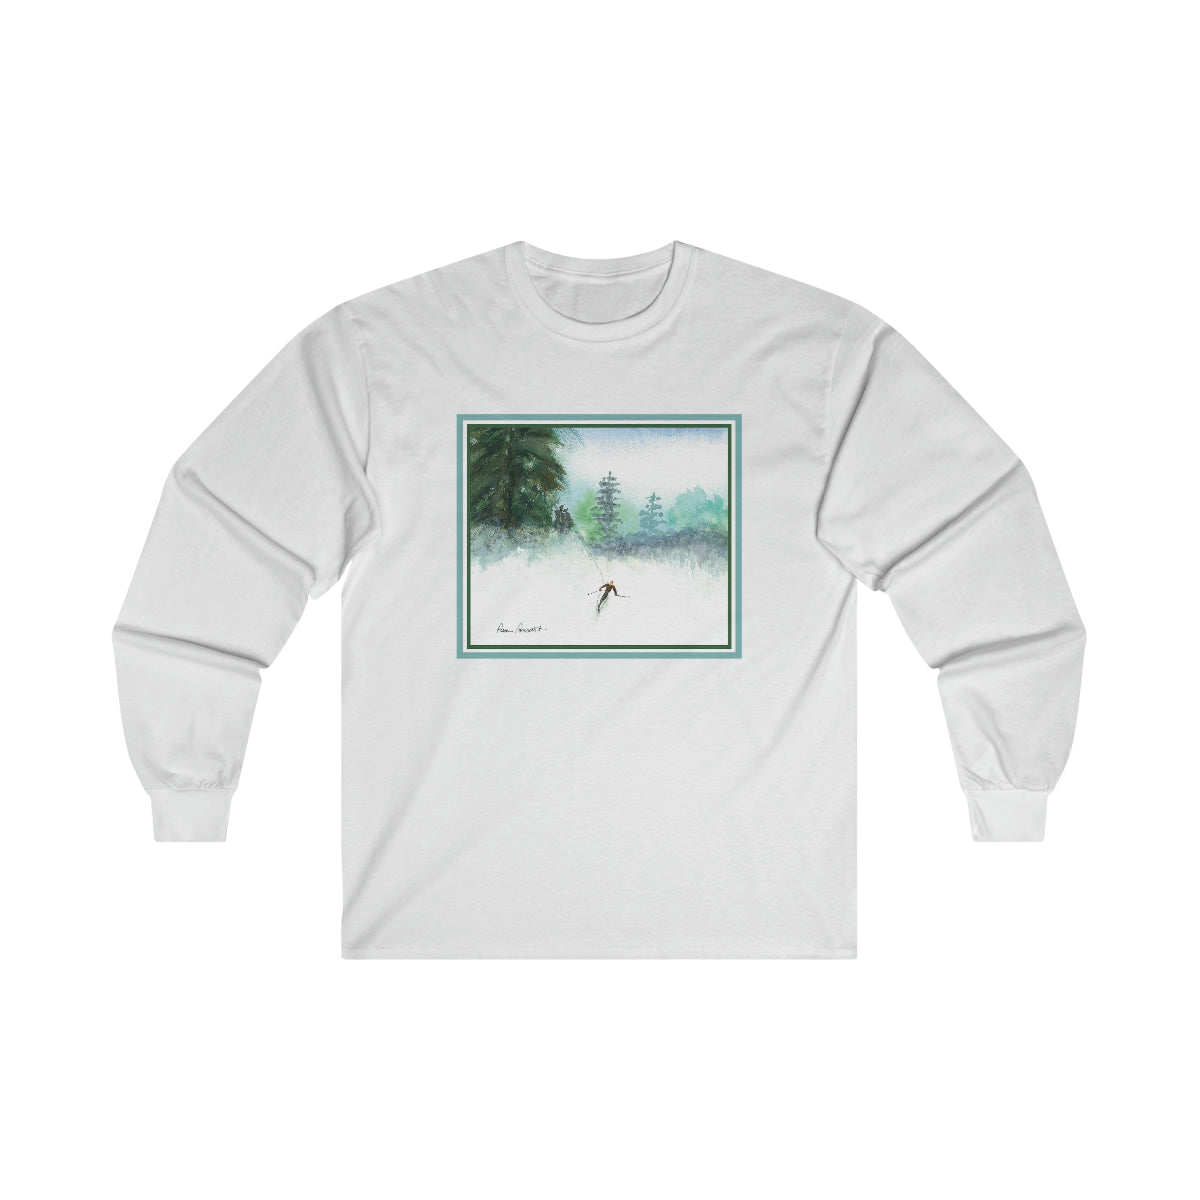 Flat front view of the white shirt